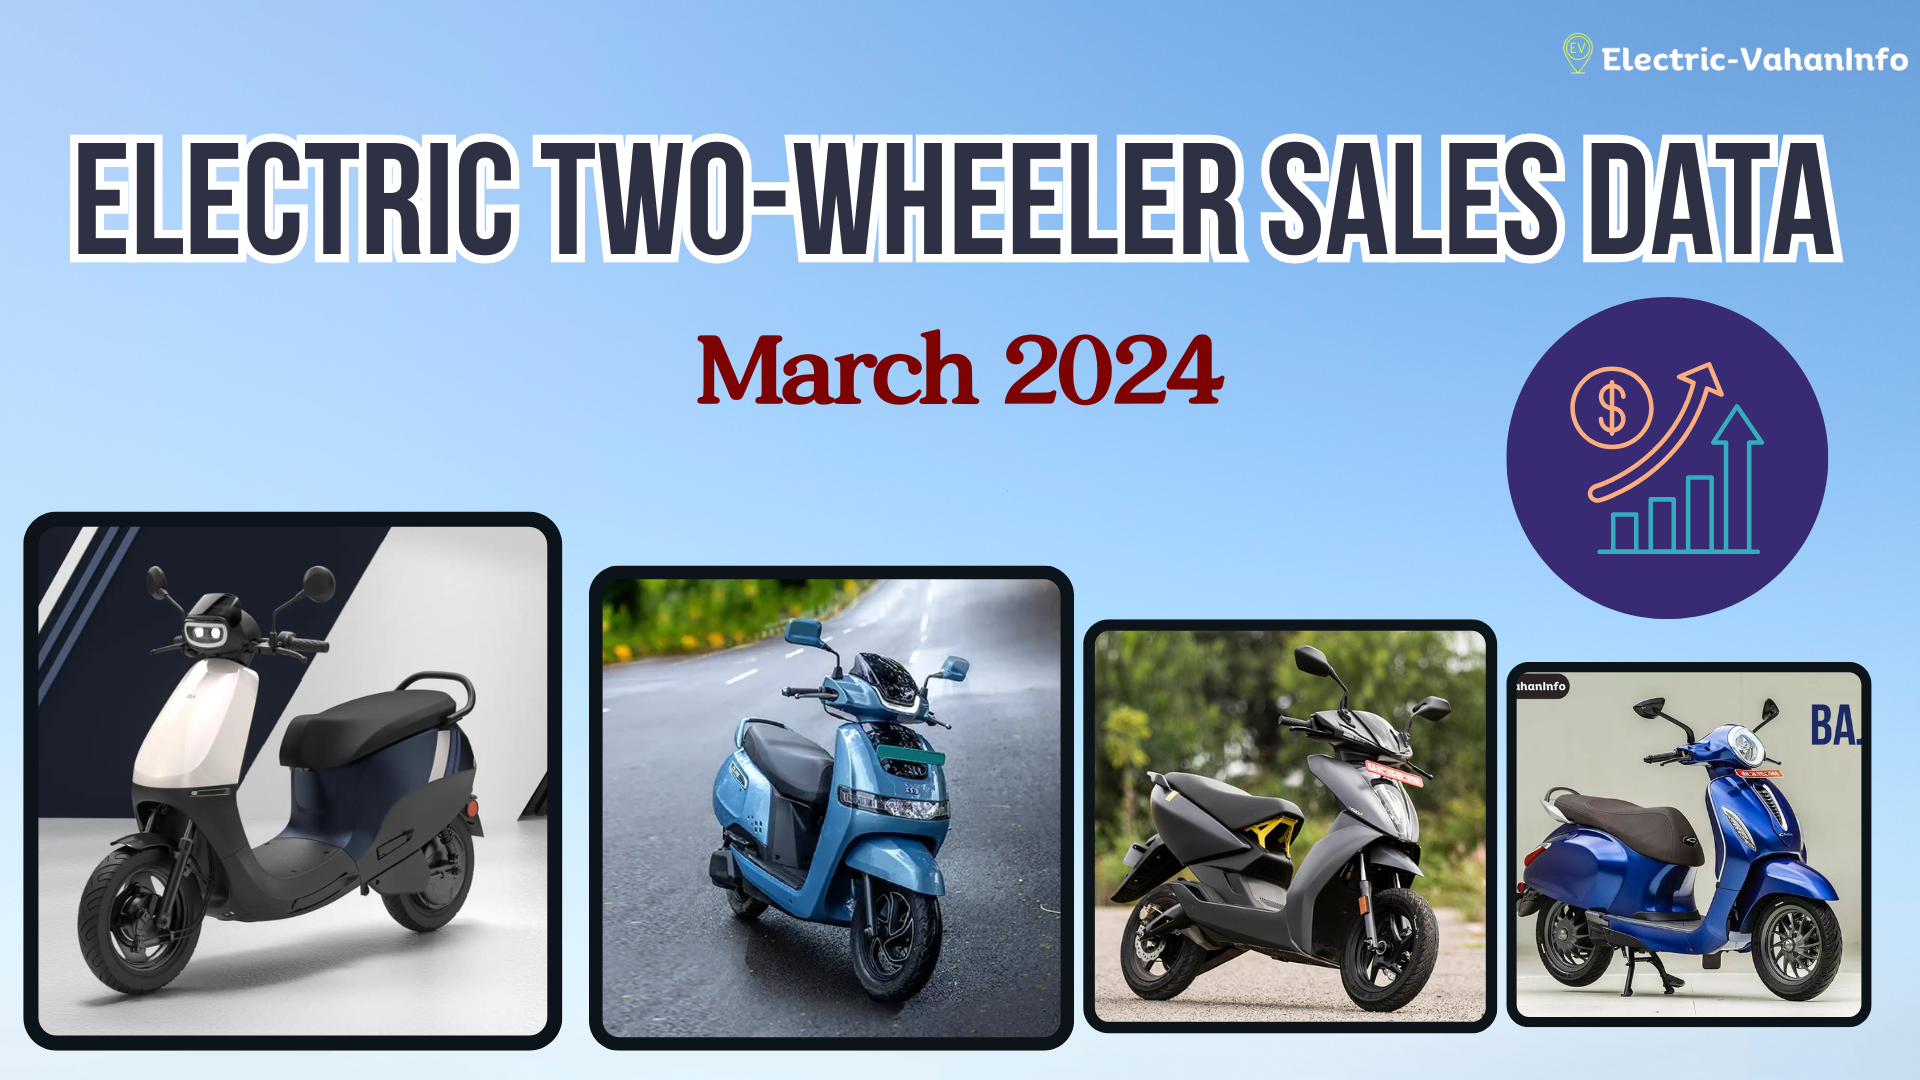 https://electric-vahaninfo.com/electric-two-wheeler-sales-report-march-2024/